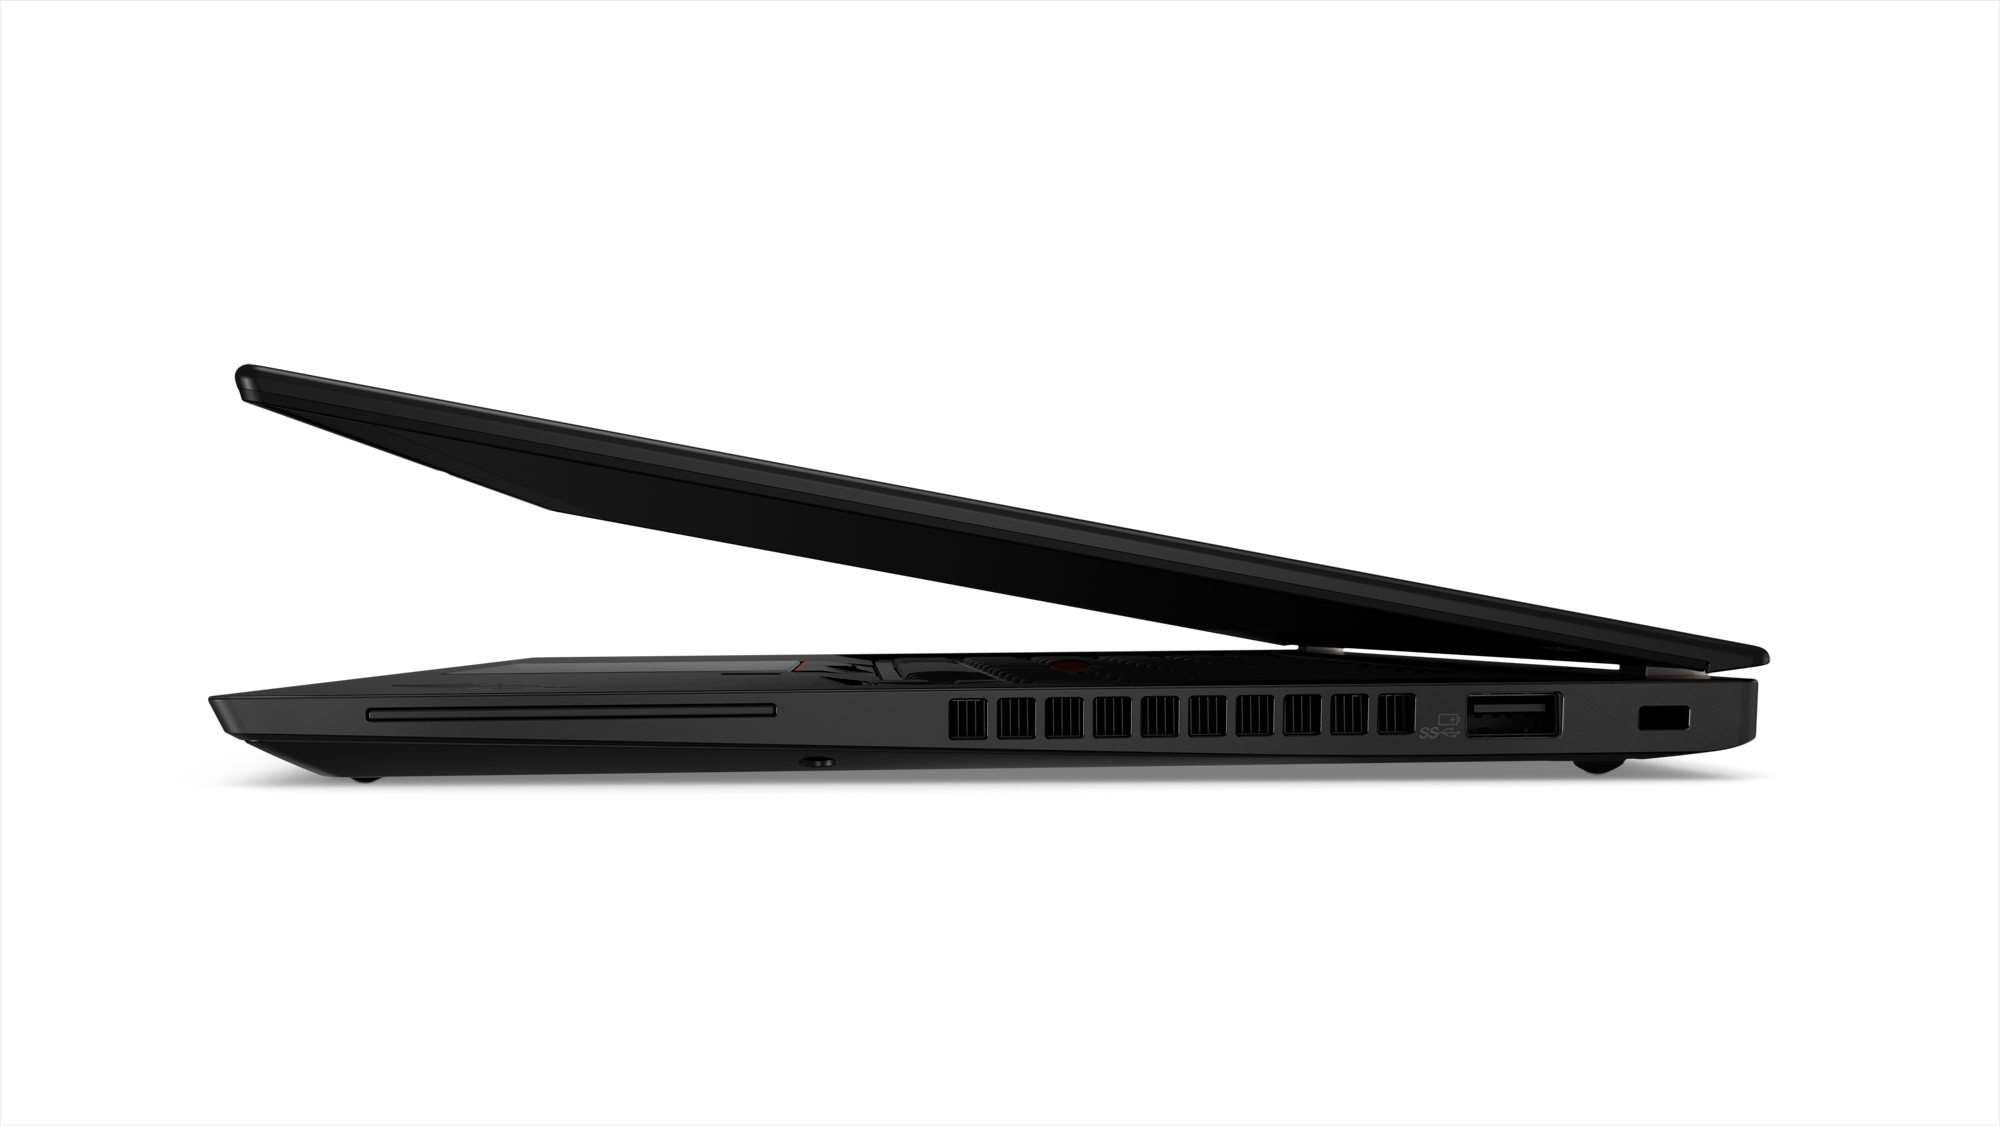 lenovo annouces new thinkpads with 10th gen cometlake thinkpad x390 6